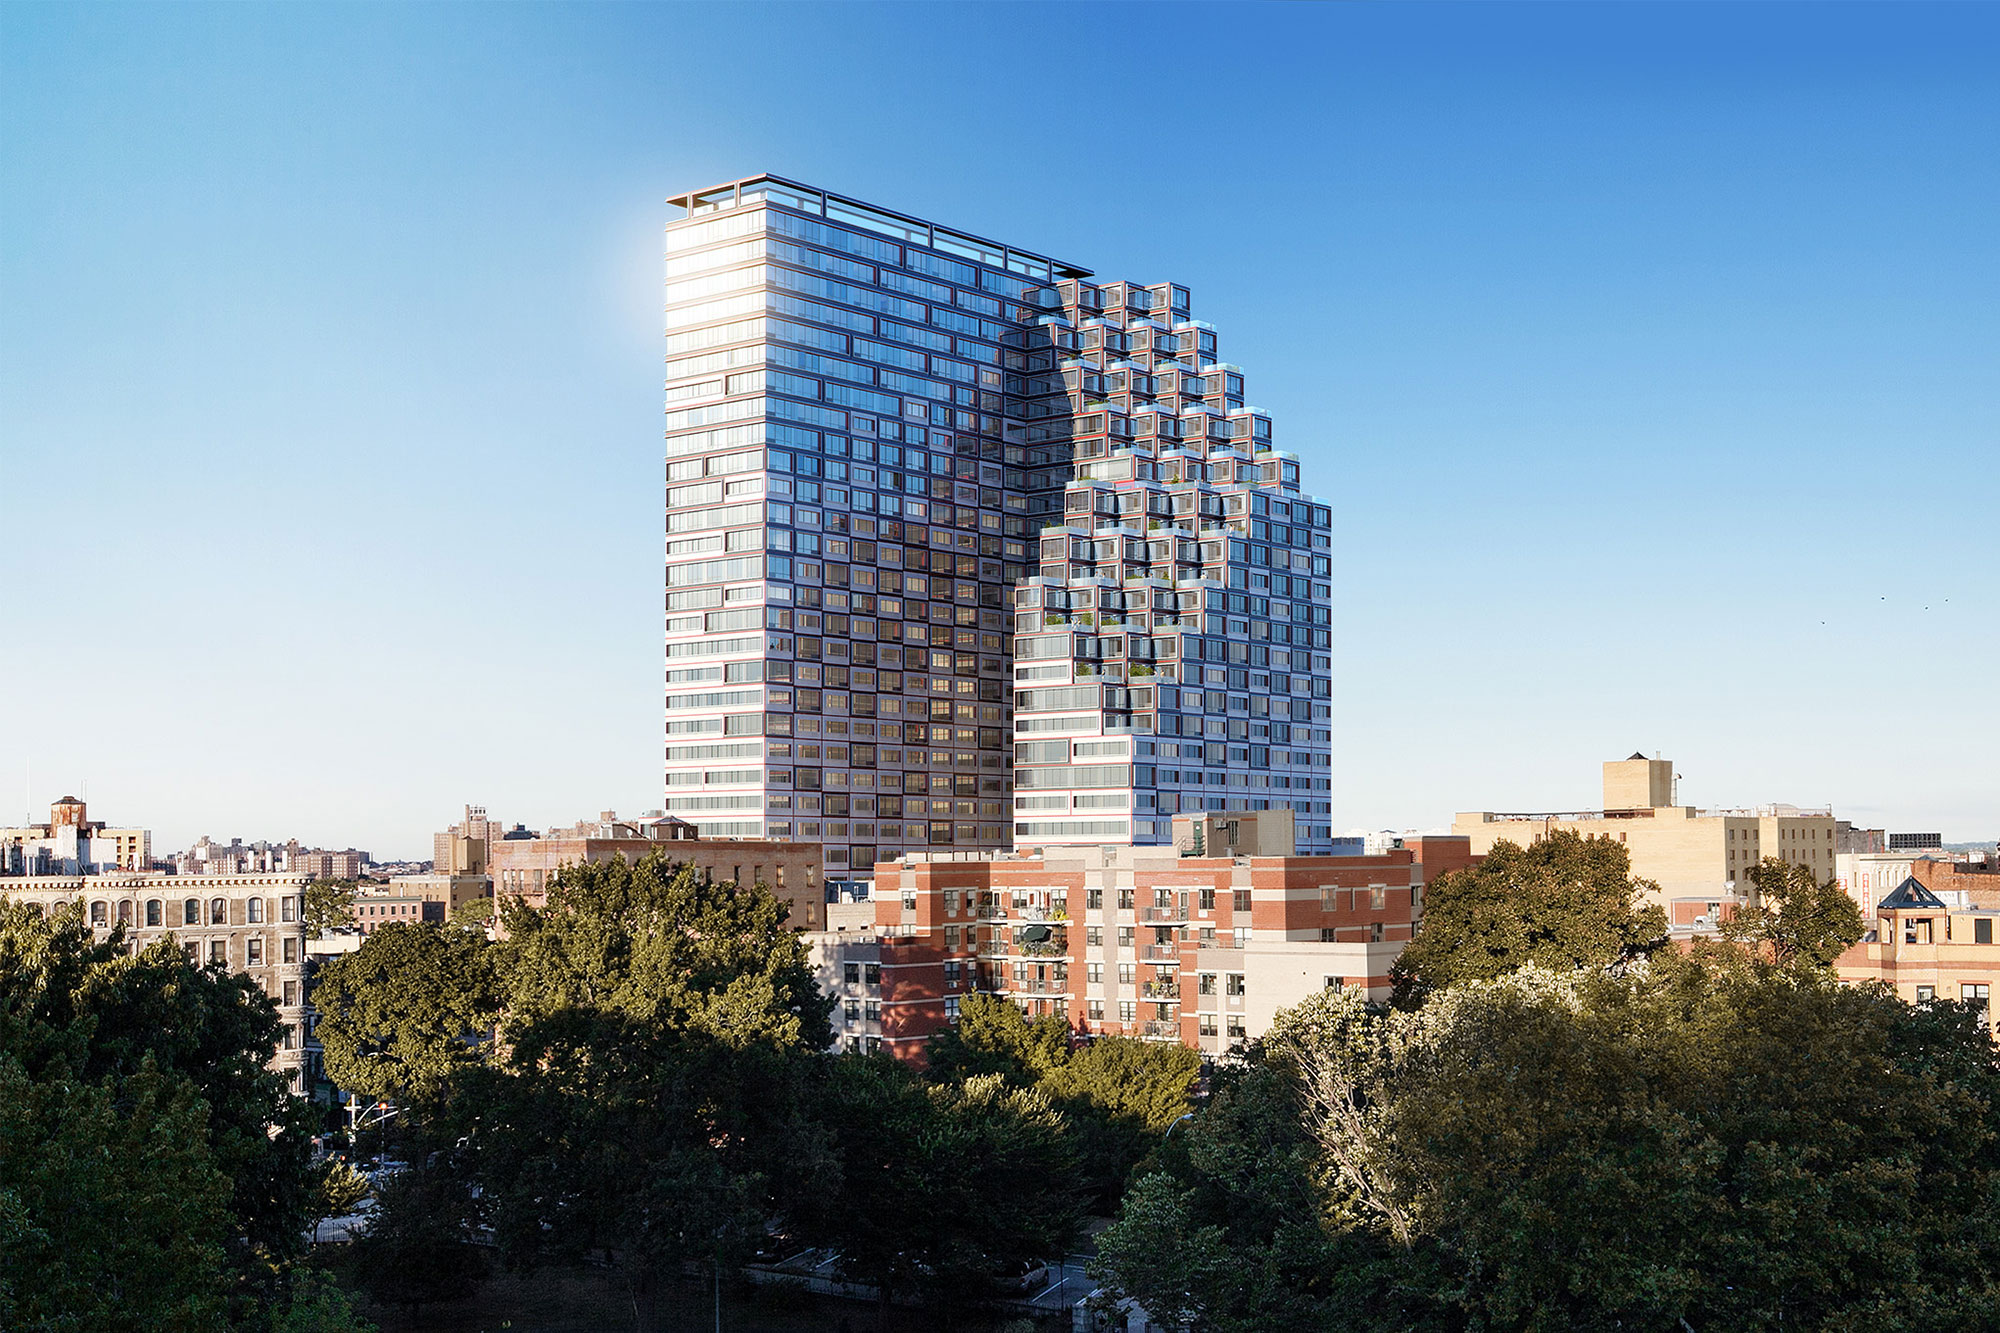 Architectural Rendering of the exterior of the 1800 Park Avenue project located in East Harlem, New York City